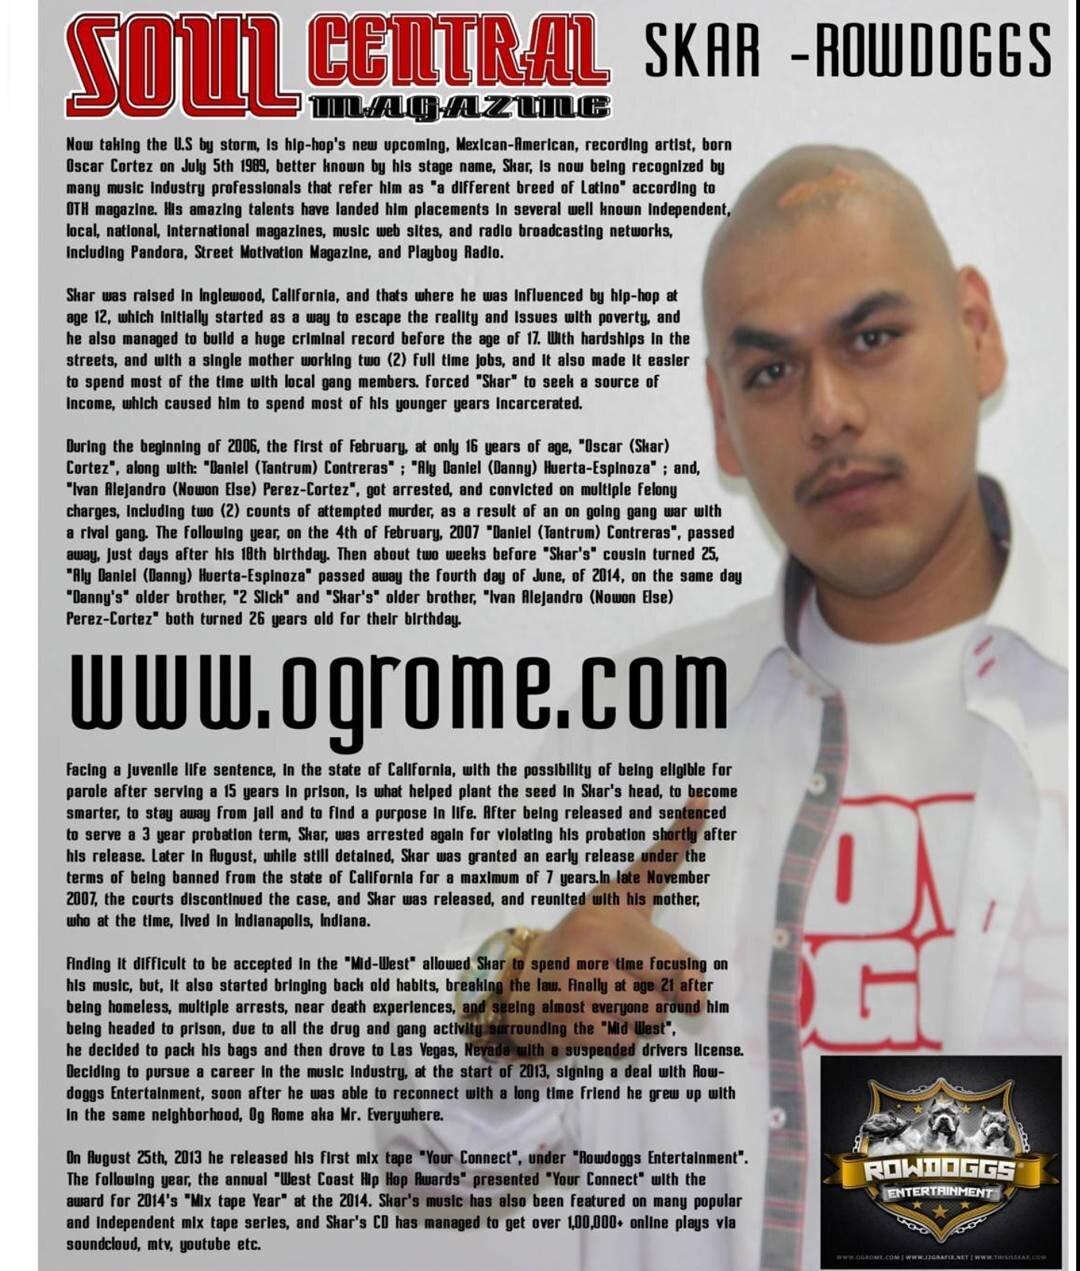 Soul Central Magazine stay showing me love. Available now #Rowdoggs #ThisIsSkar #SoulCentral #l4l #followforfollow #follow4follow #followplease #followback #followme #f4f #spamforspam #spam4spam #s4s #recentforrecent #recent4recent #r4r #row4row #lik